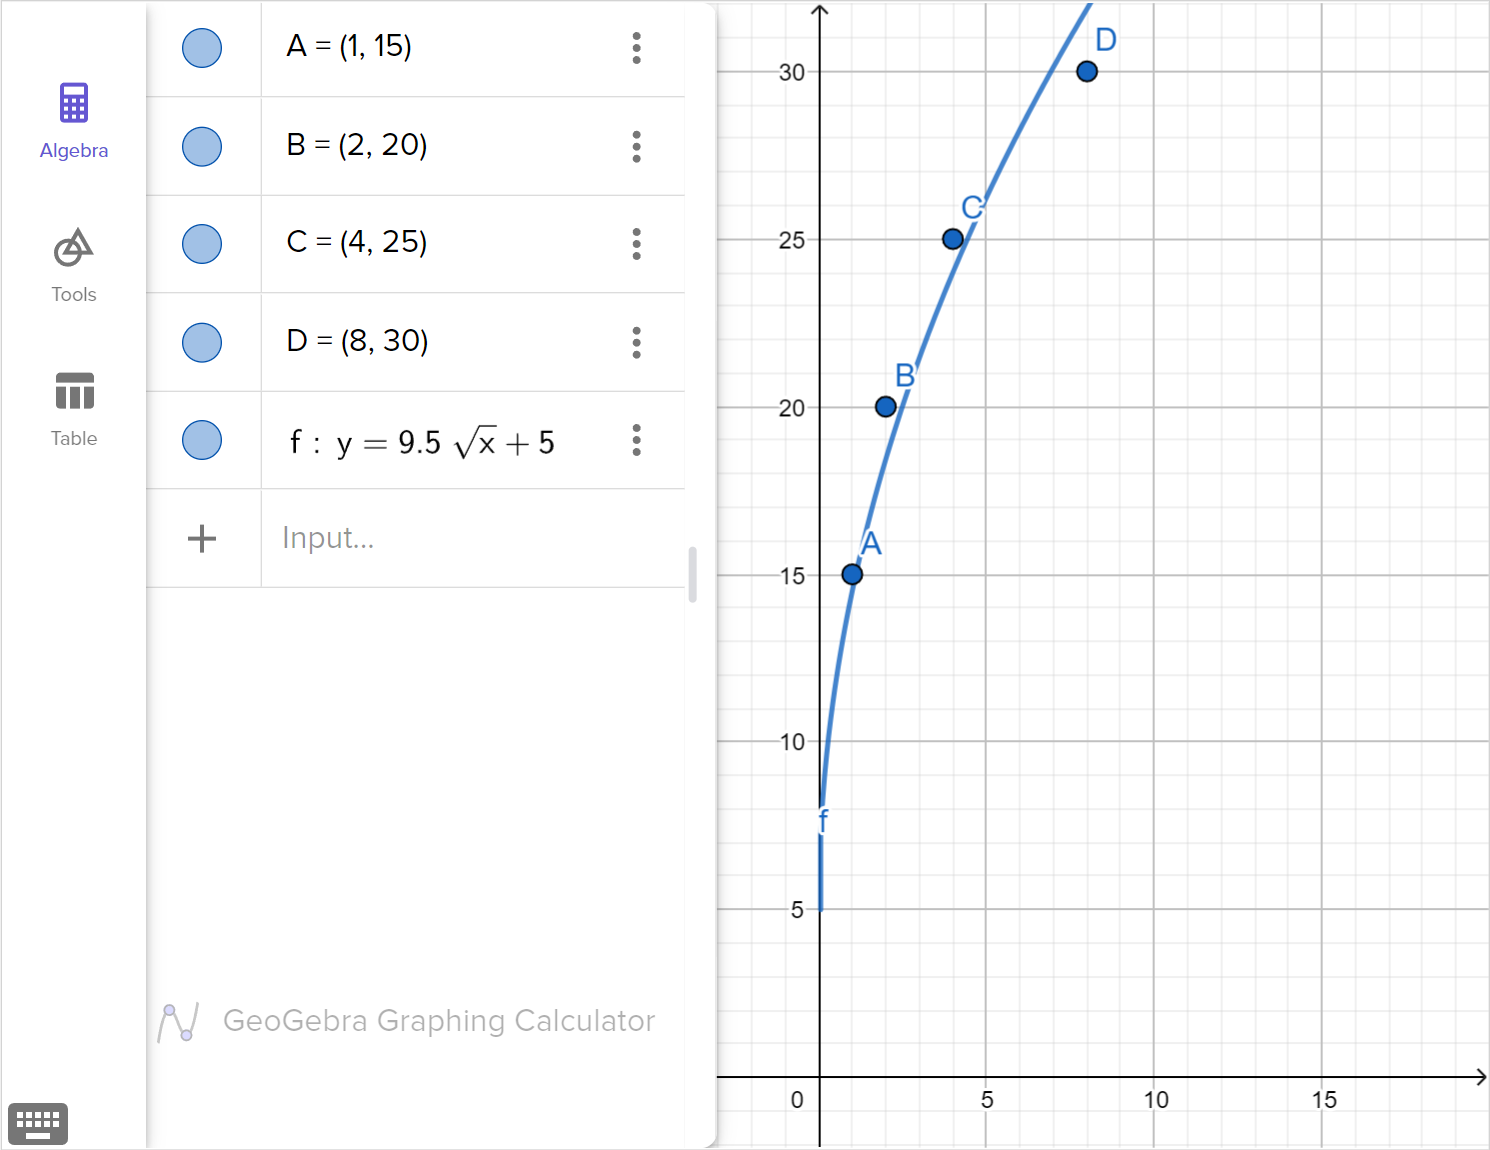 A screenshot of the GeoGebra graphing calculator showing the points A at (1,15), B at (2, 20), C at (4, 25), D at (8,30), and the graph of y equals 9.5 square root of x plus 5. Speak to your teacher for more details.